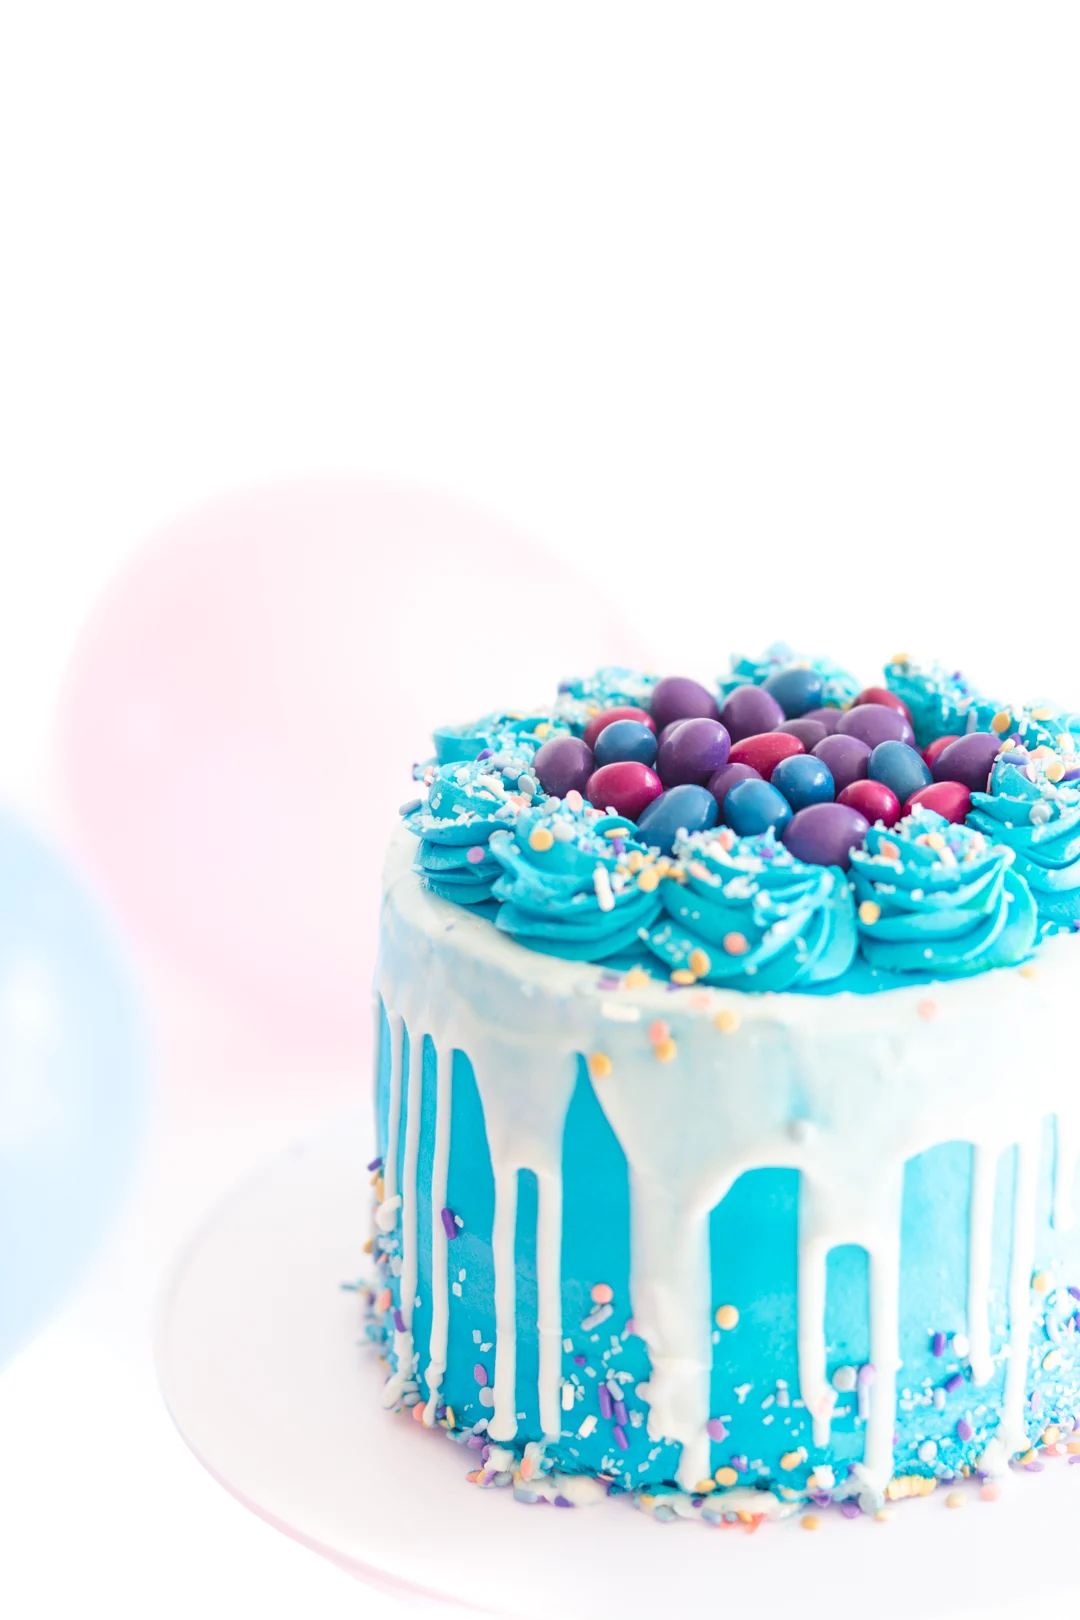 pretty blue cake with white icing drip. Topped with pretty swirls of blue frosting designs and finished with pretty candy coated candies that are purple, pink and blue.